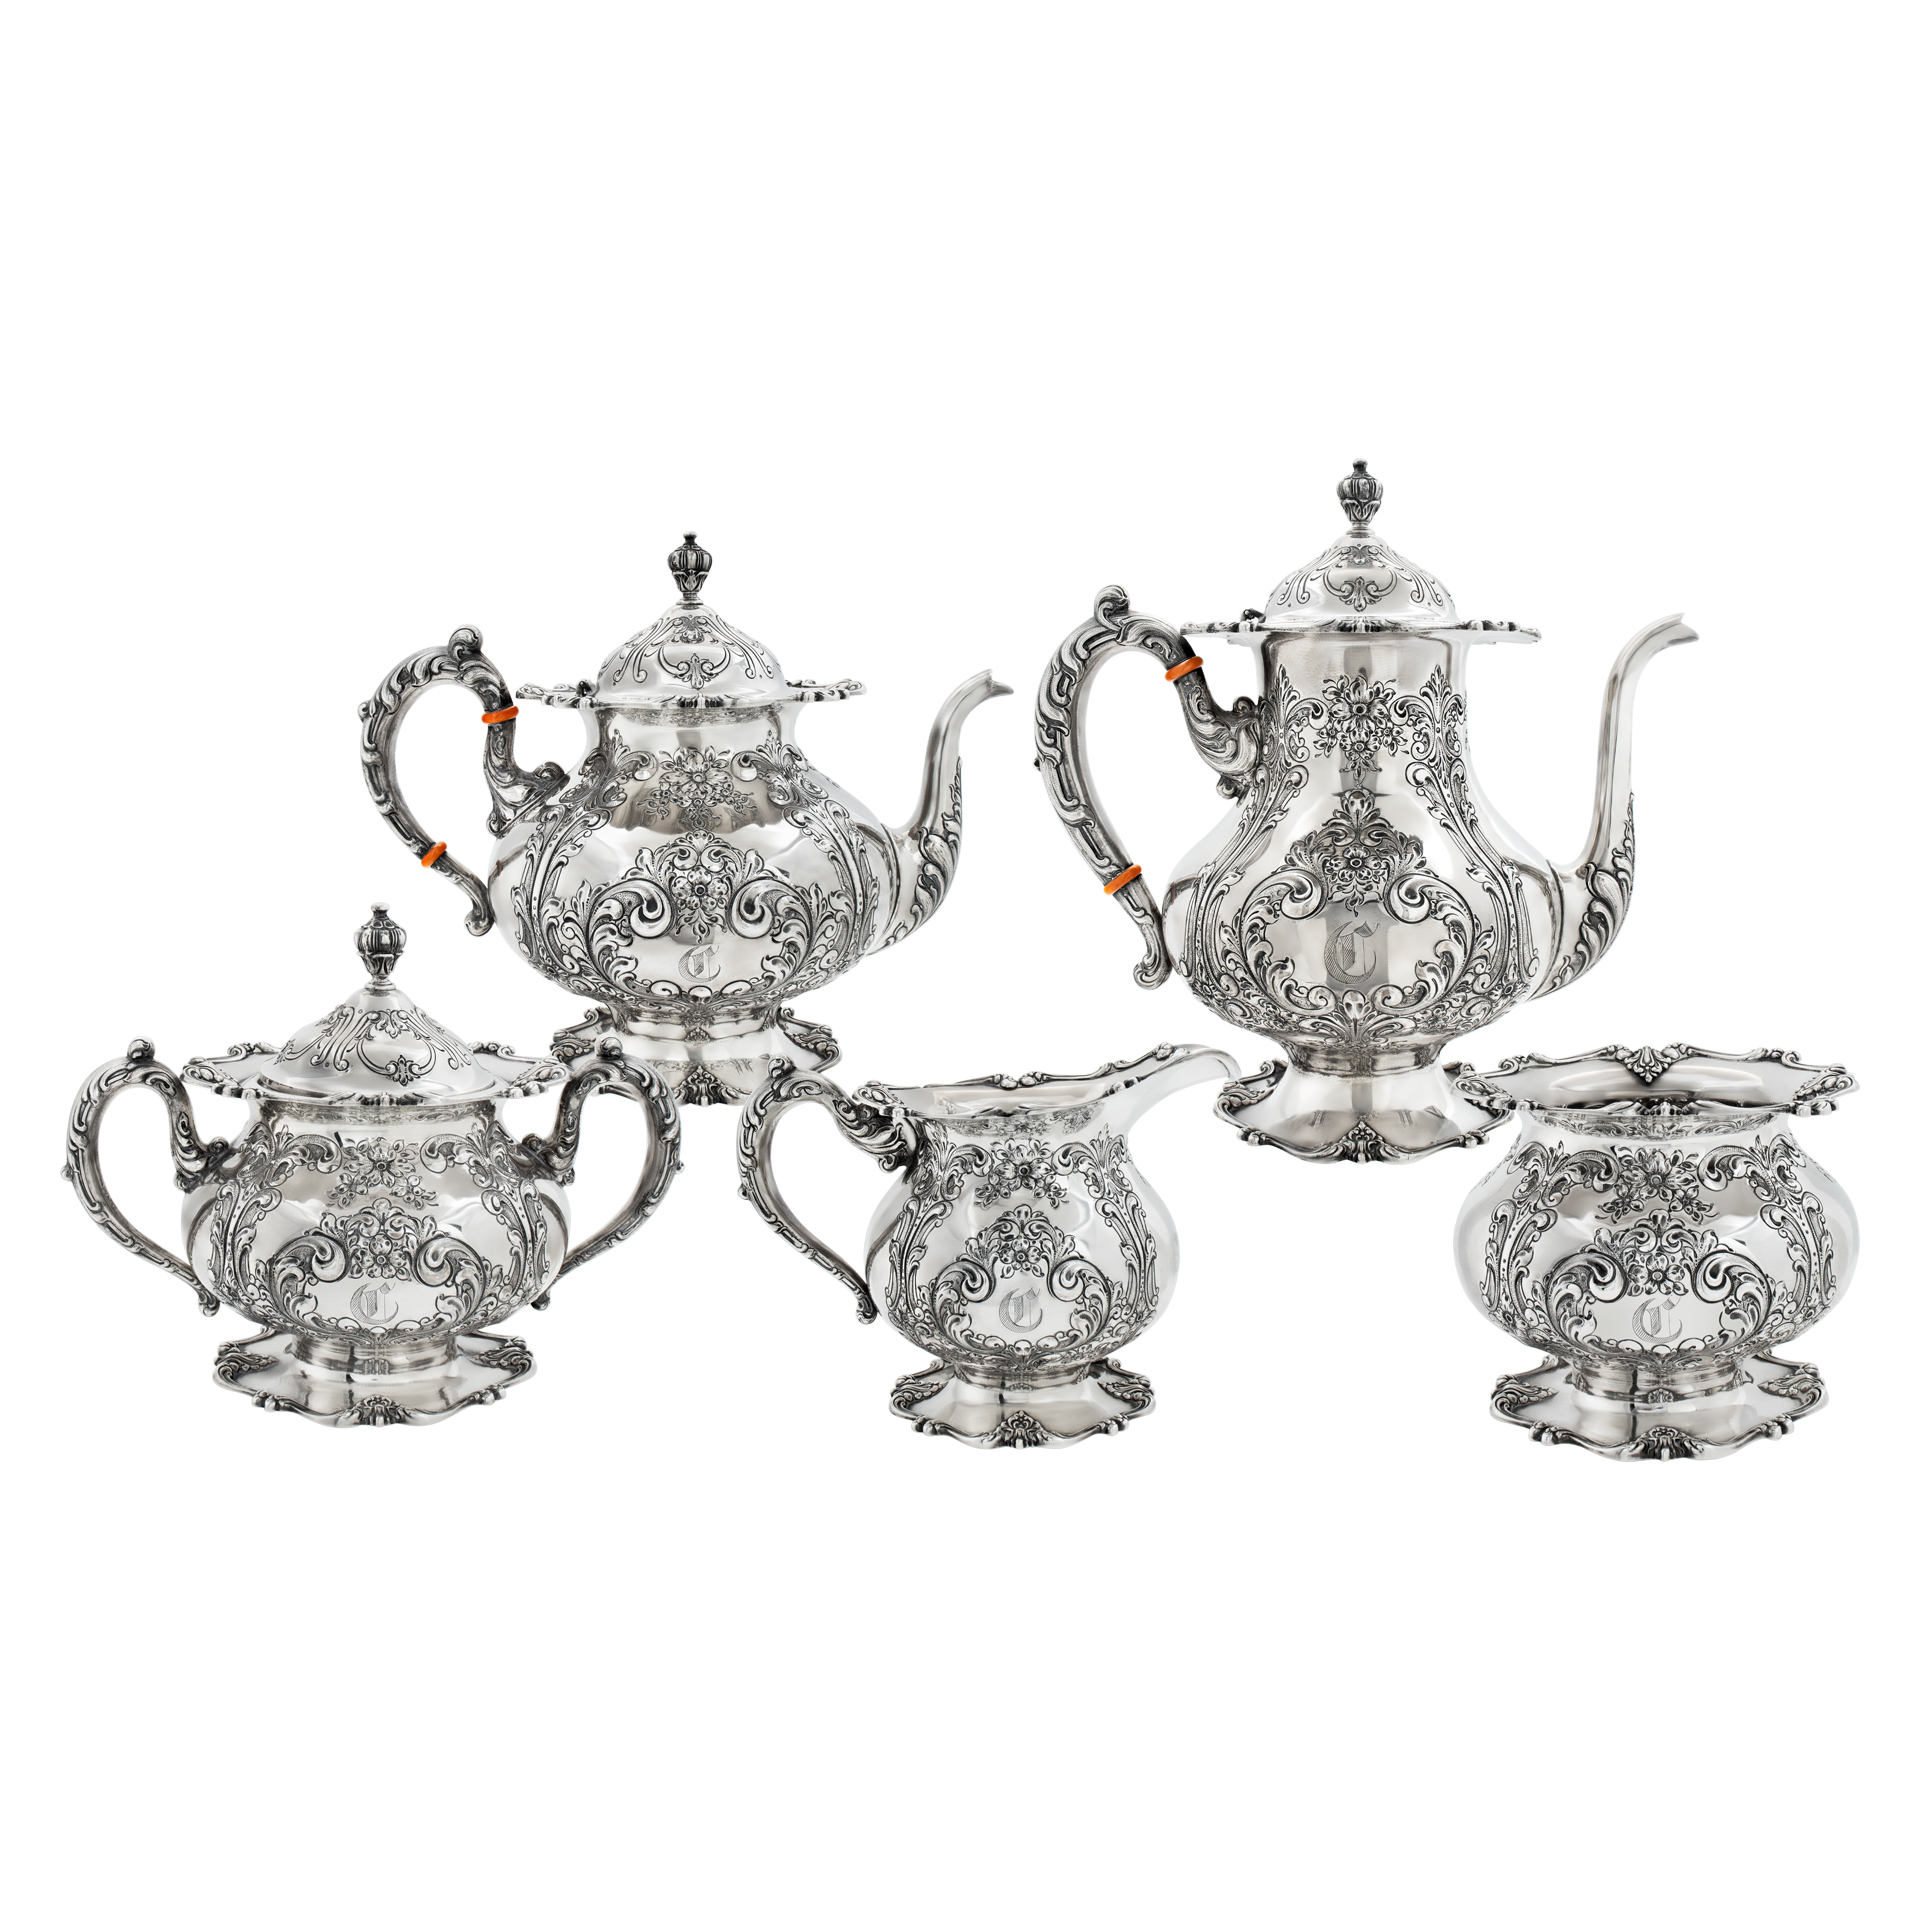 Frank M. Whiting 5 pieces hand chased heavy sterling silver tea set. Circa 1900- Over 137 troy ounces of .925 sterling silver.